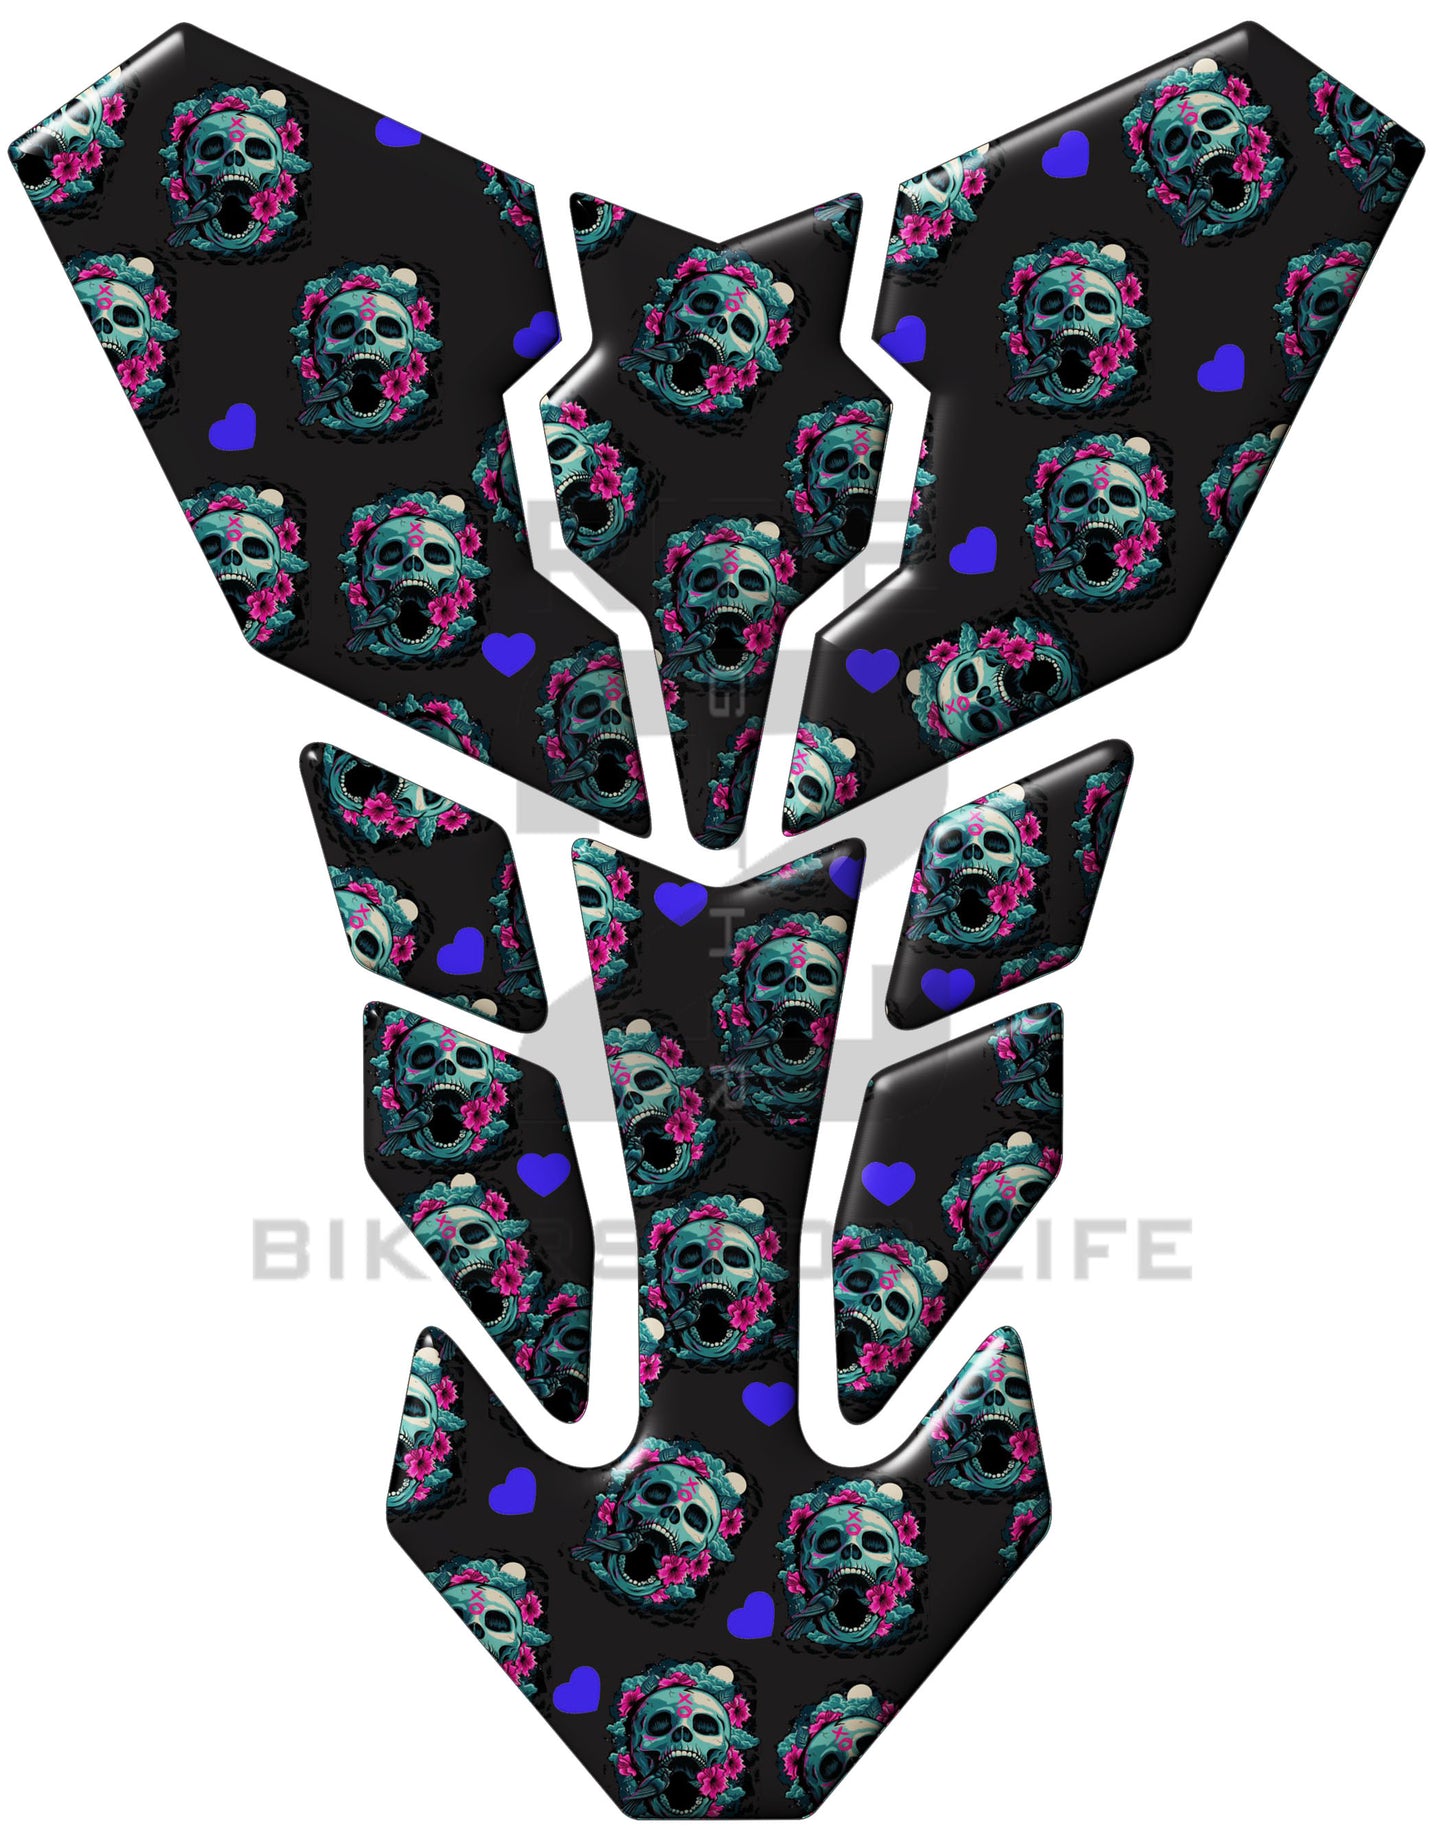 Day of the Dead Motor Bike Tank Pad Protector. A Street Pad which fits most motorcycles.